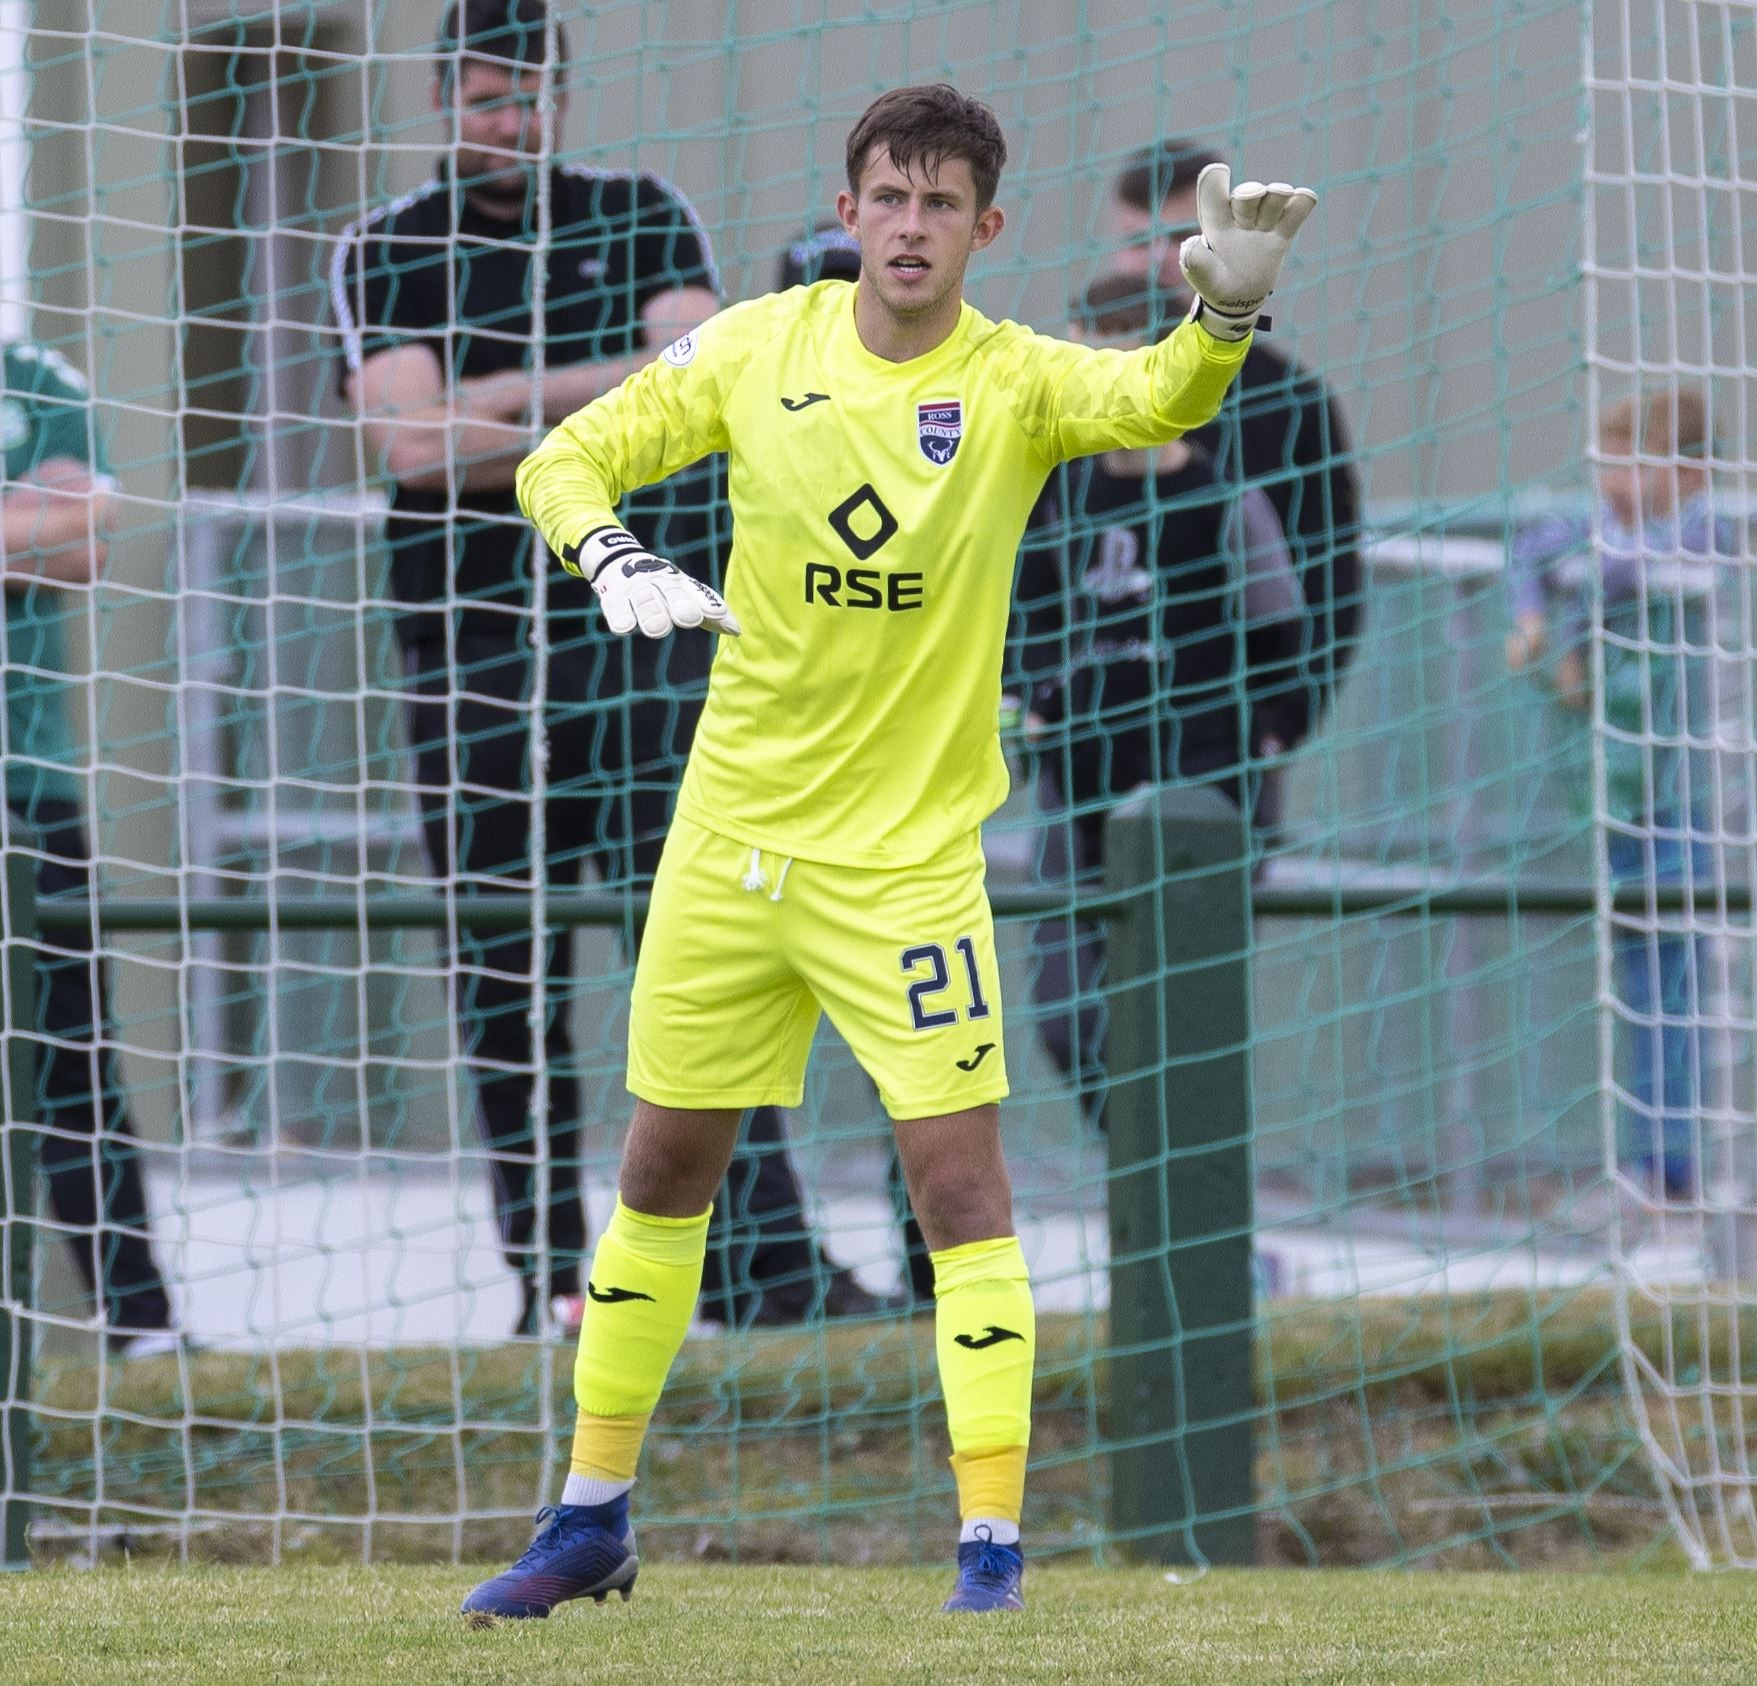 Picture - Ken Macpherson. Premier Sports Cup (Group Stage) Buckie Thistle(1) v Ross County(1). Ross County win 5-4 after penalties. 09.07.22. Ross County 'keeper Ross Munro.